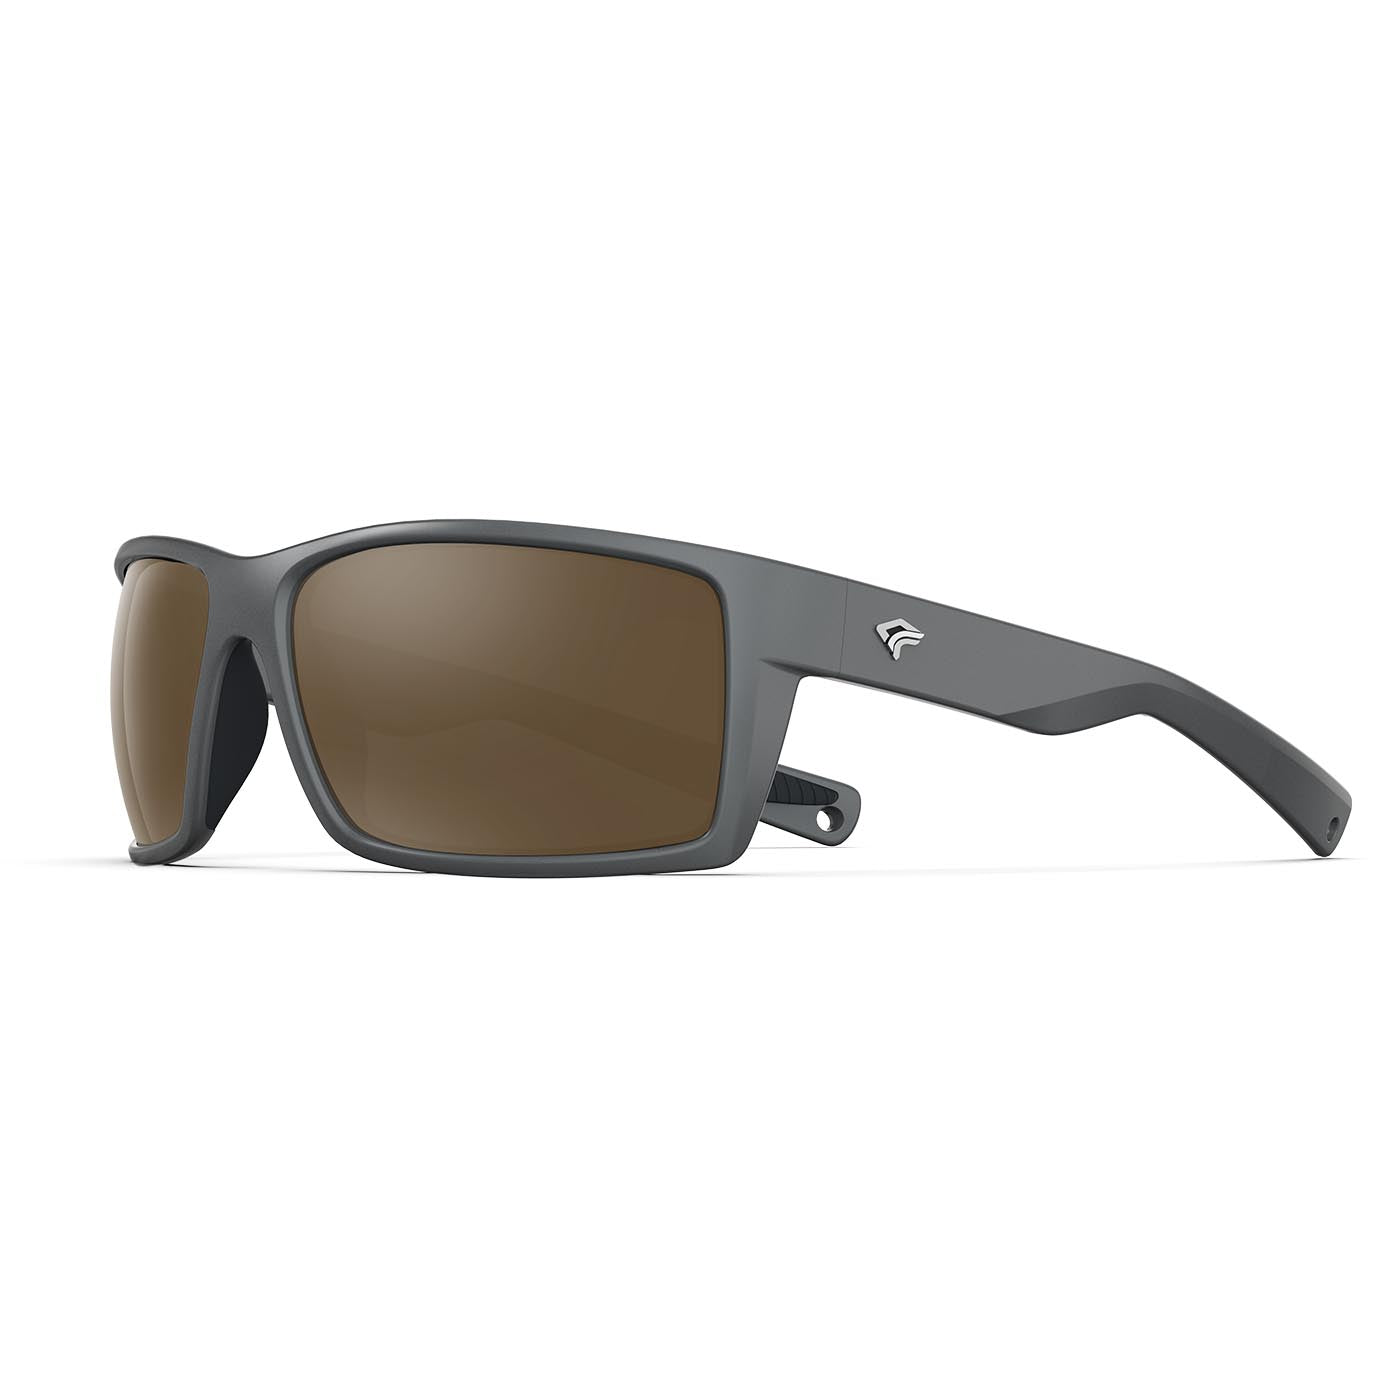 Talos-Best Fit Sunglasses For Your Outdoor Activities